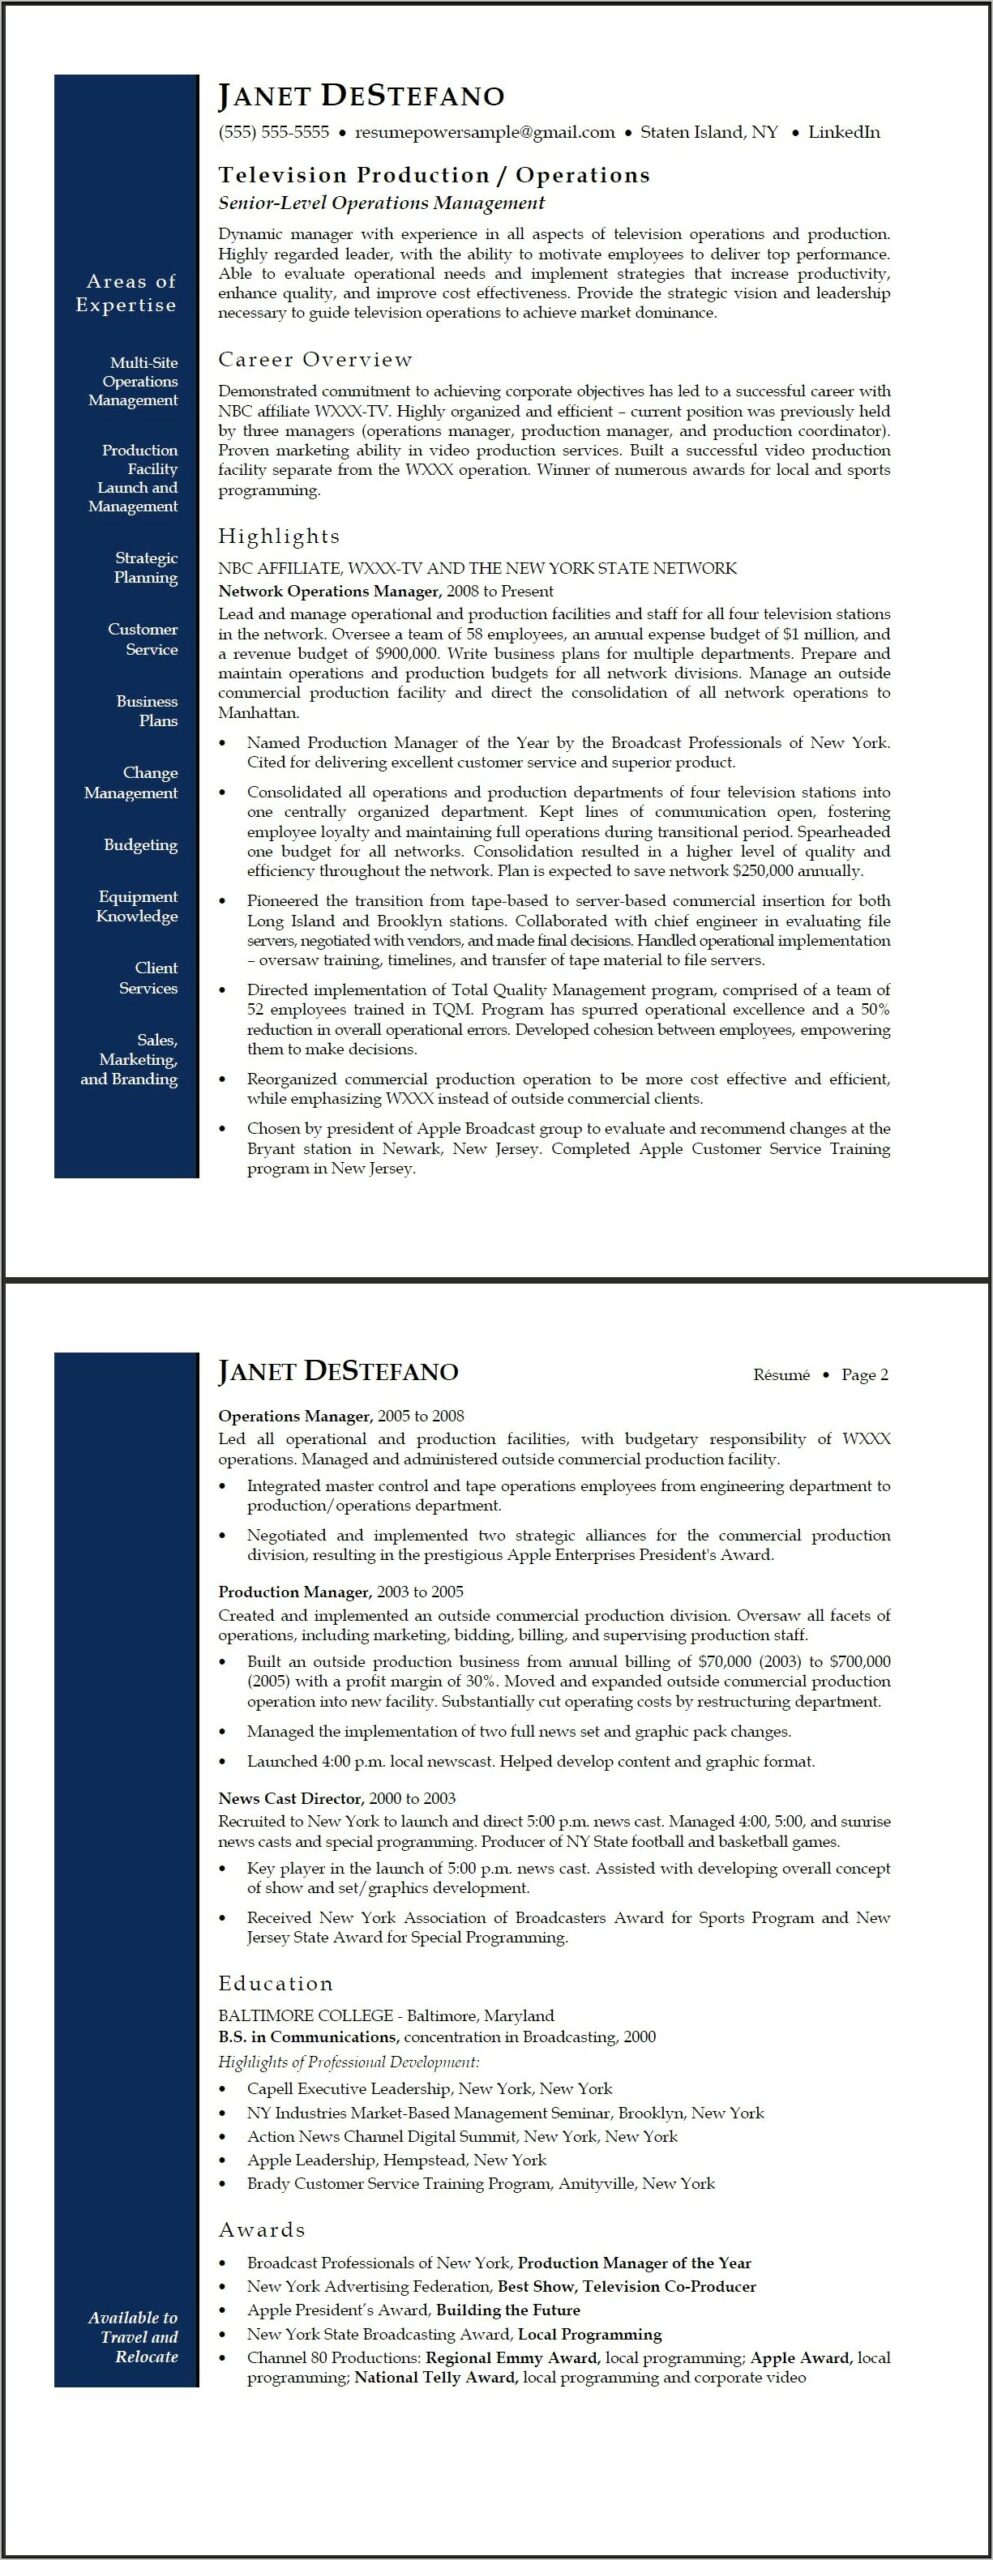 Free Operations Manager Resume Templates